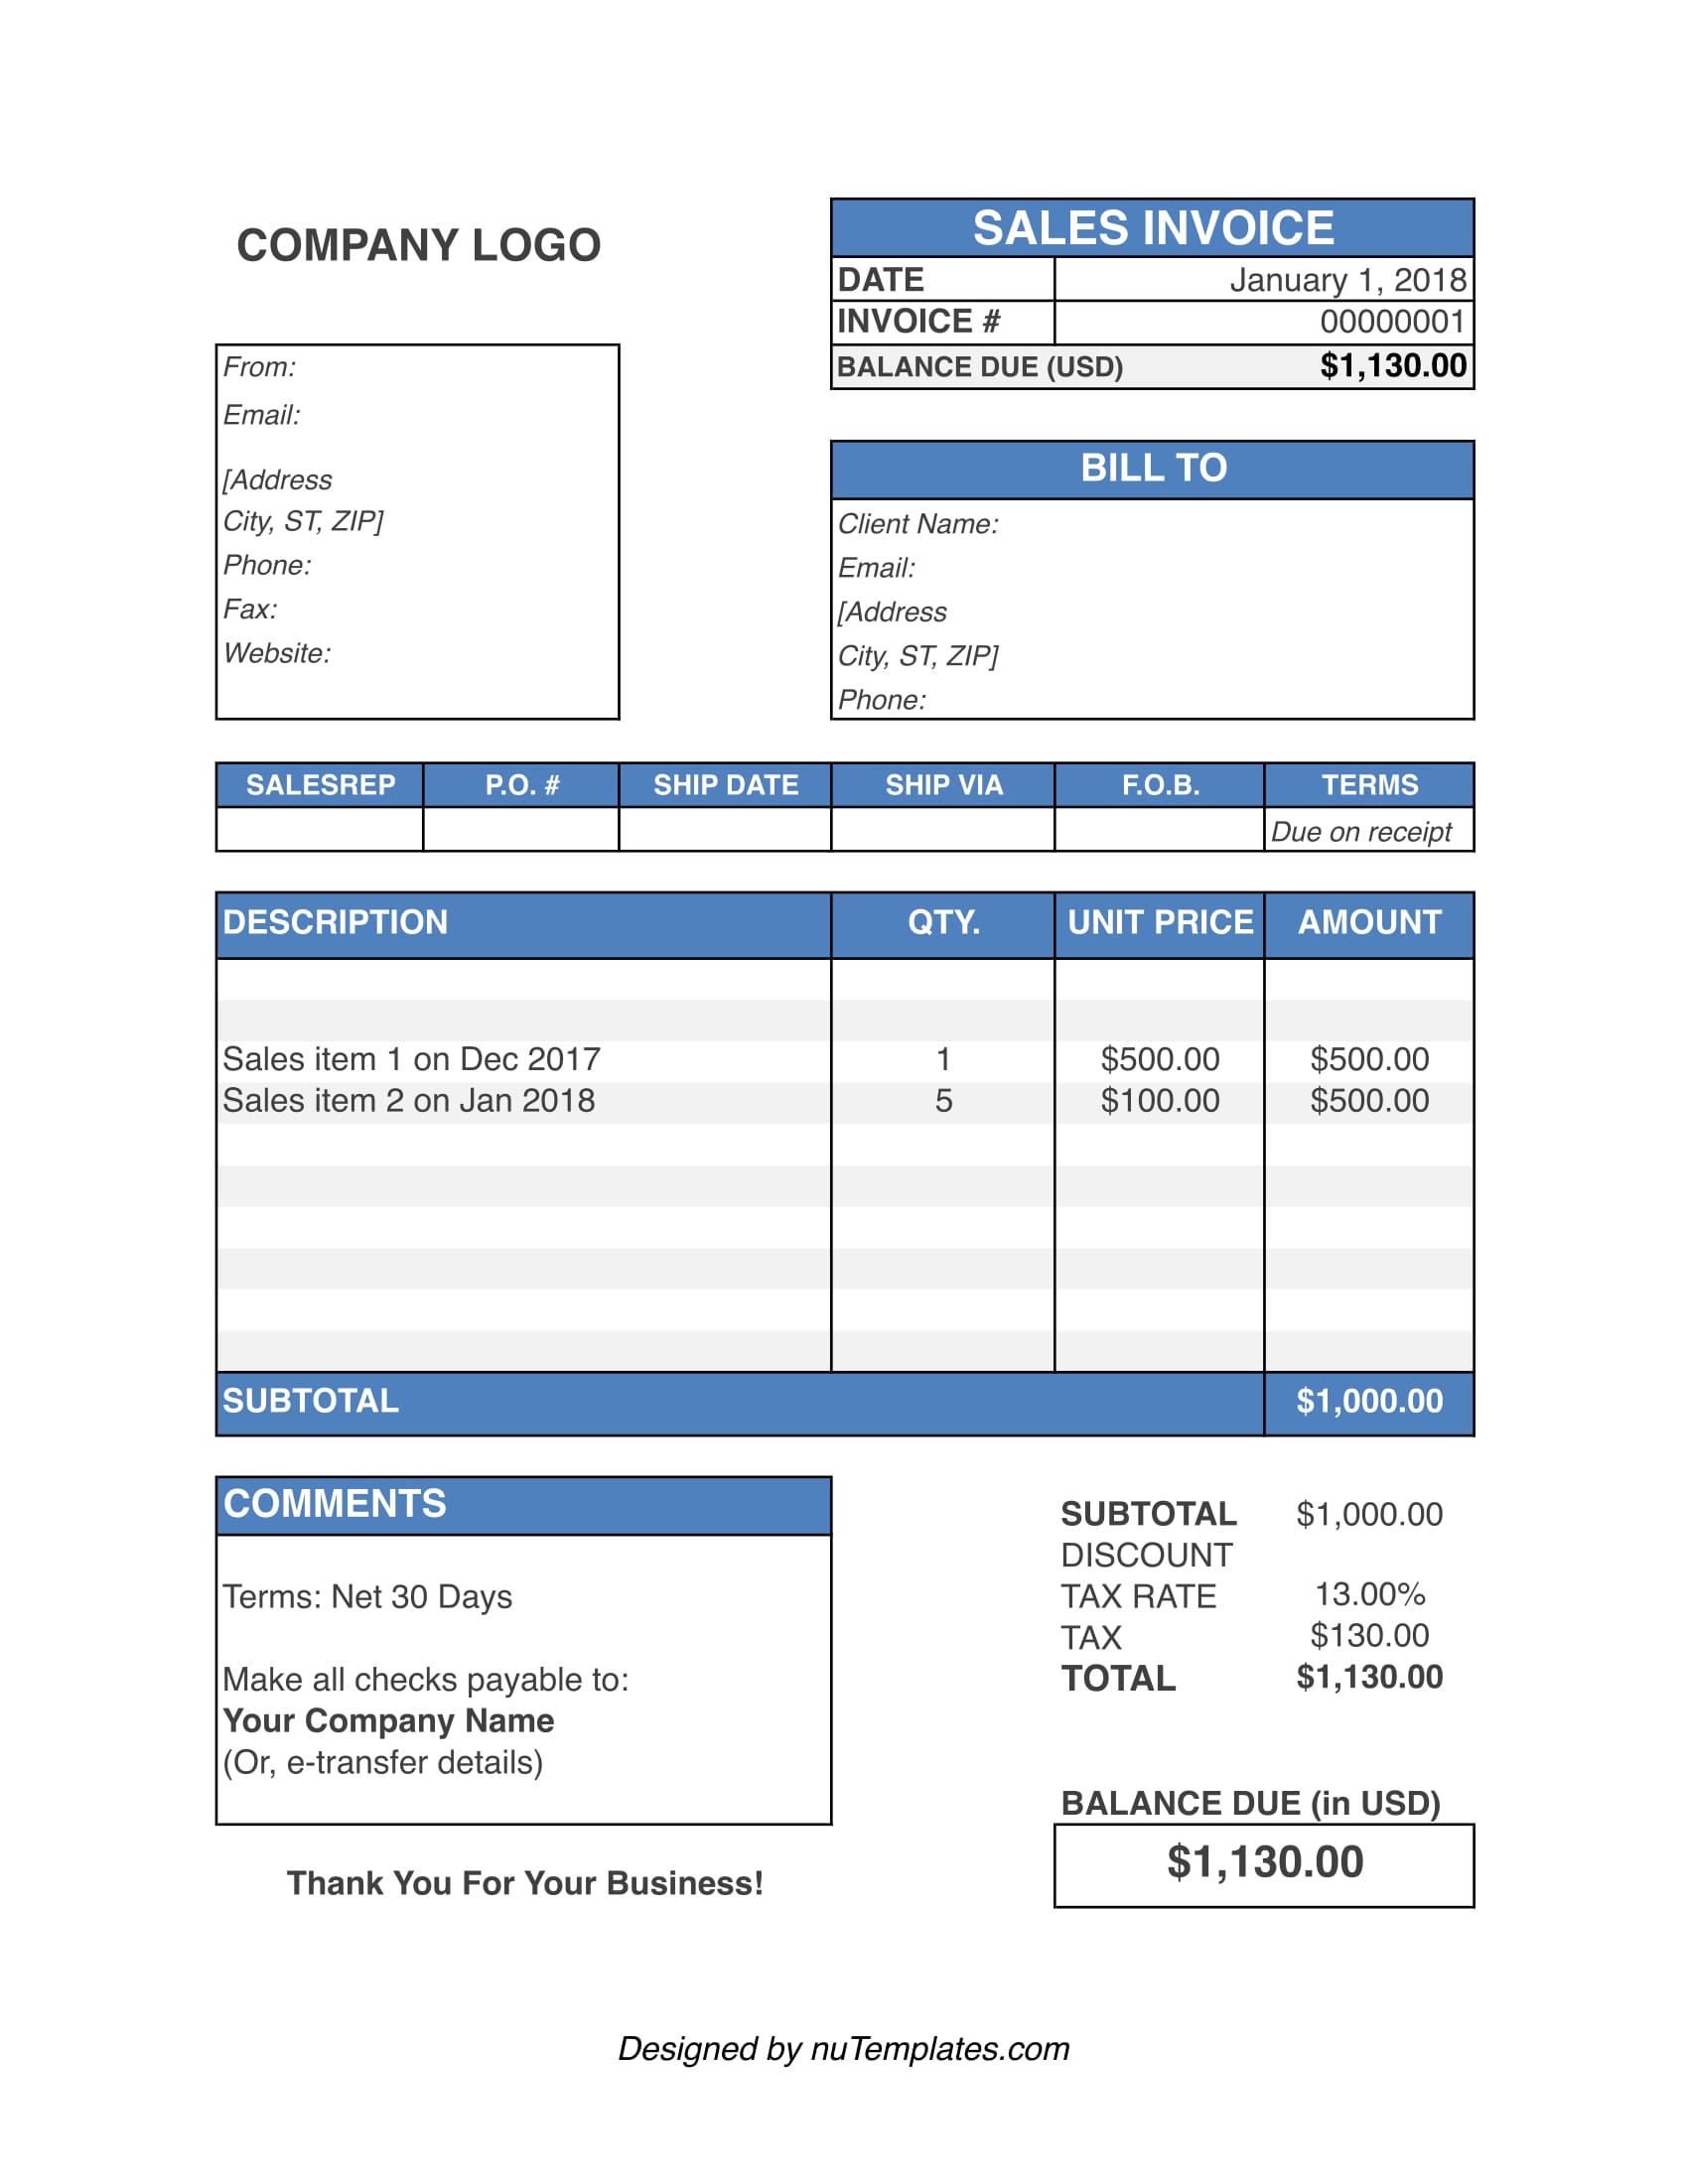 sales invoice template img